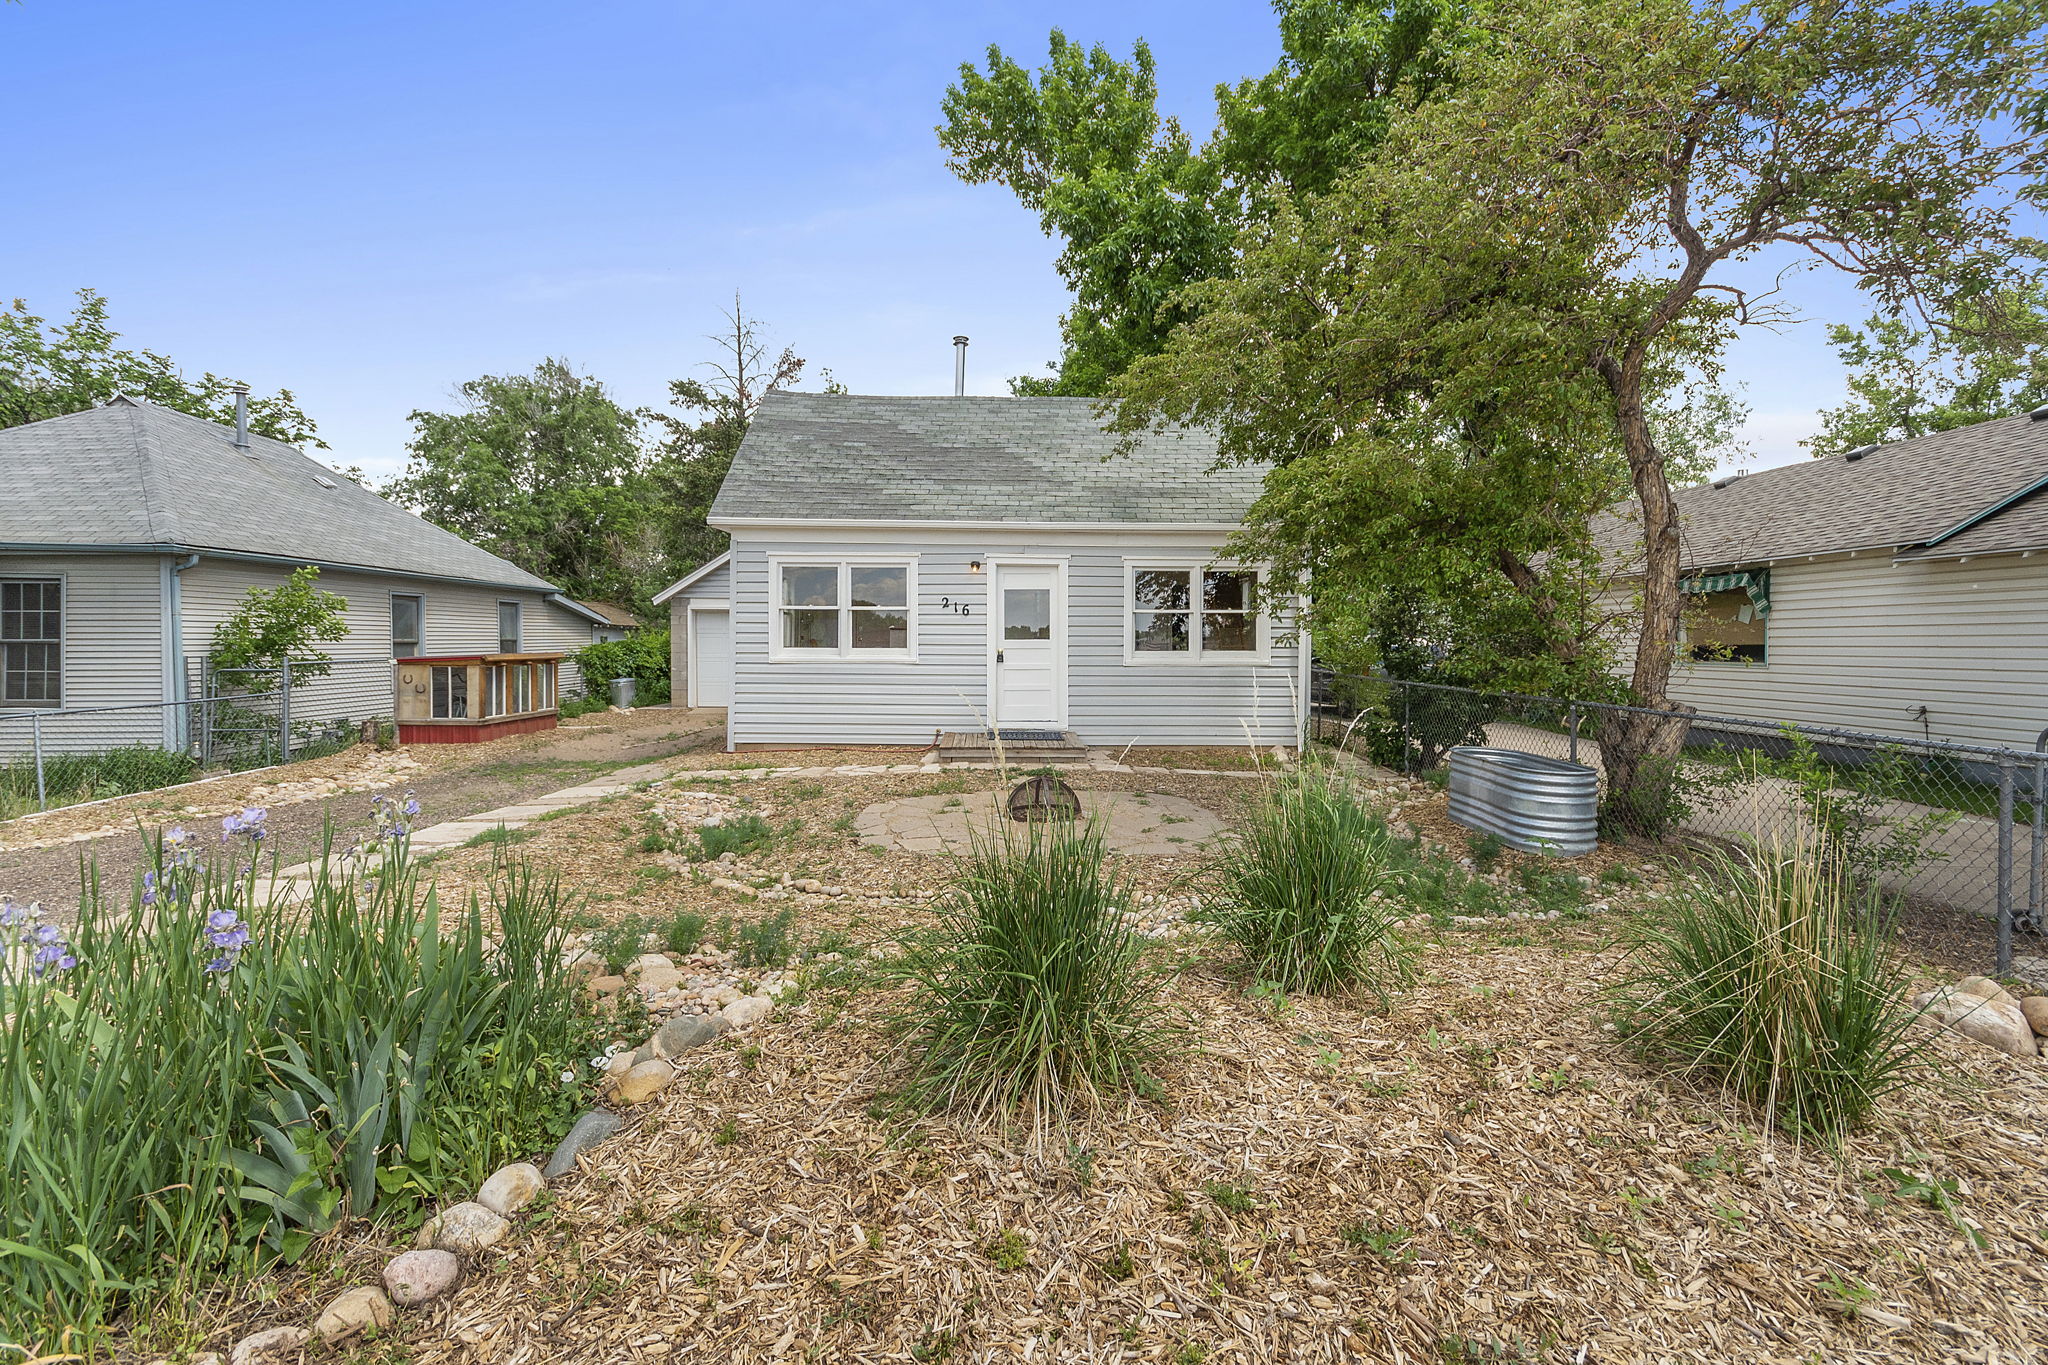  216 Lincoln St, Fort Collins, CO 80524, US